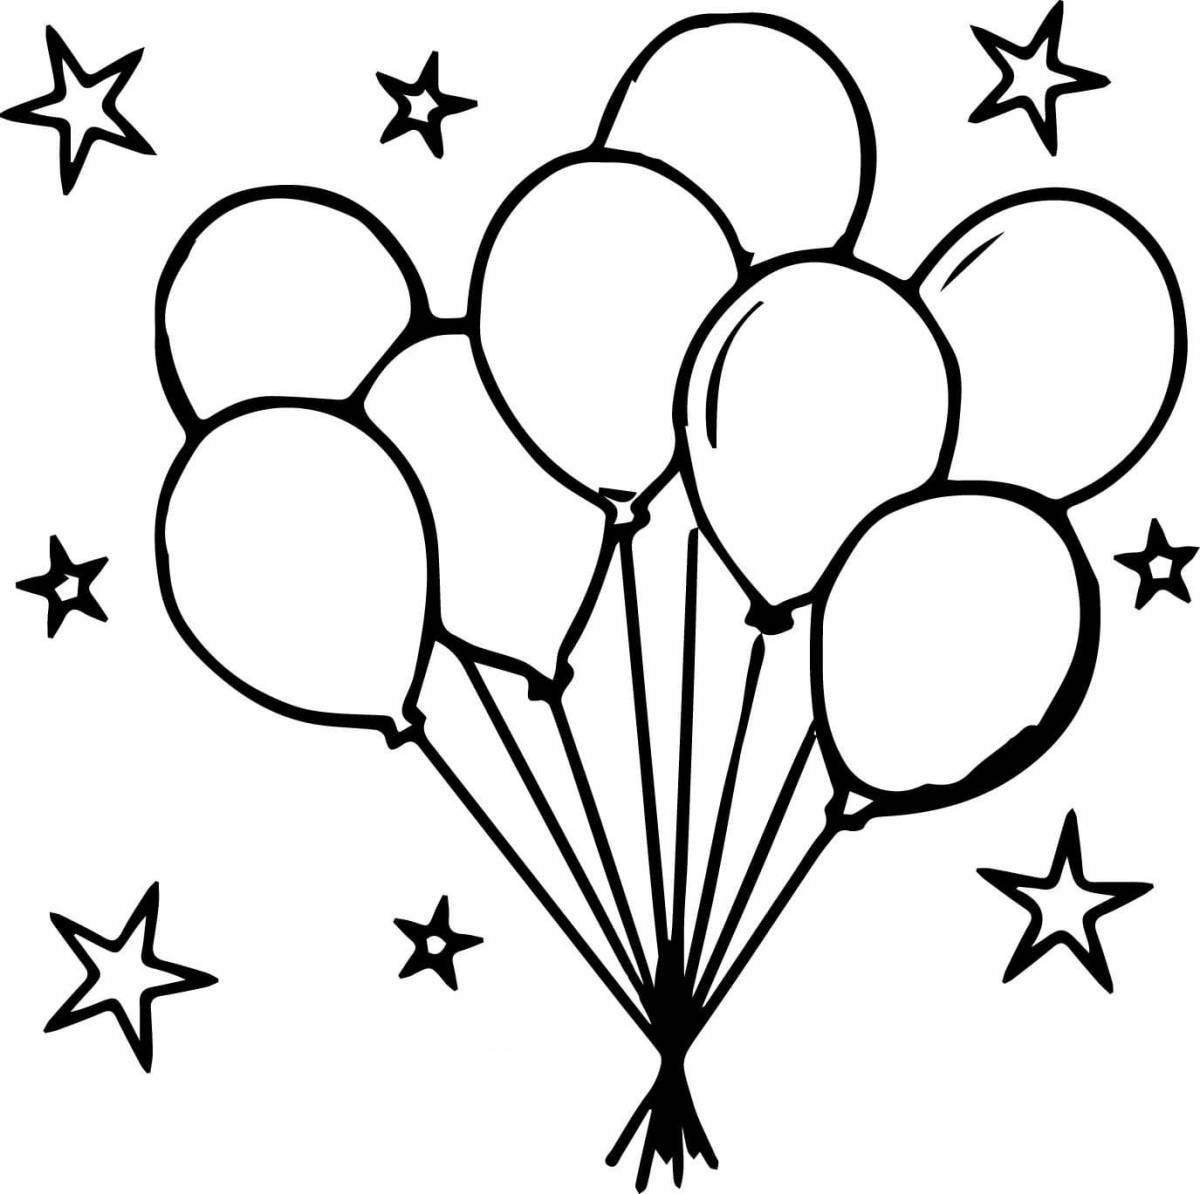 Exploding balloons coloring page